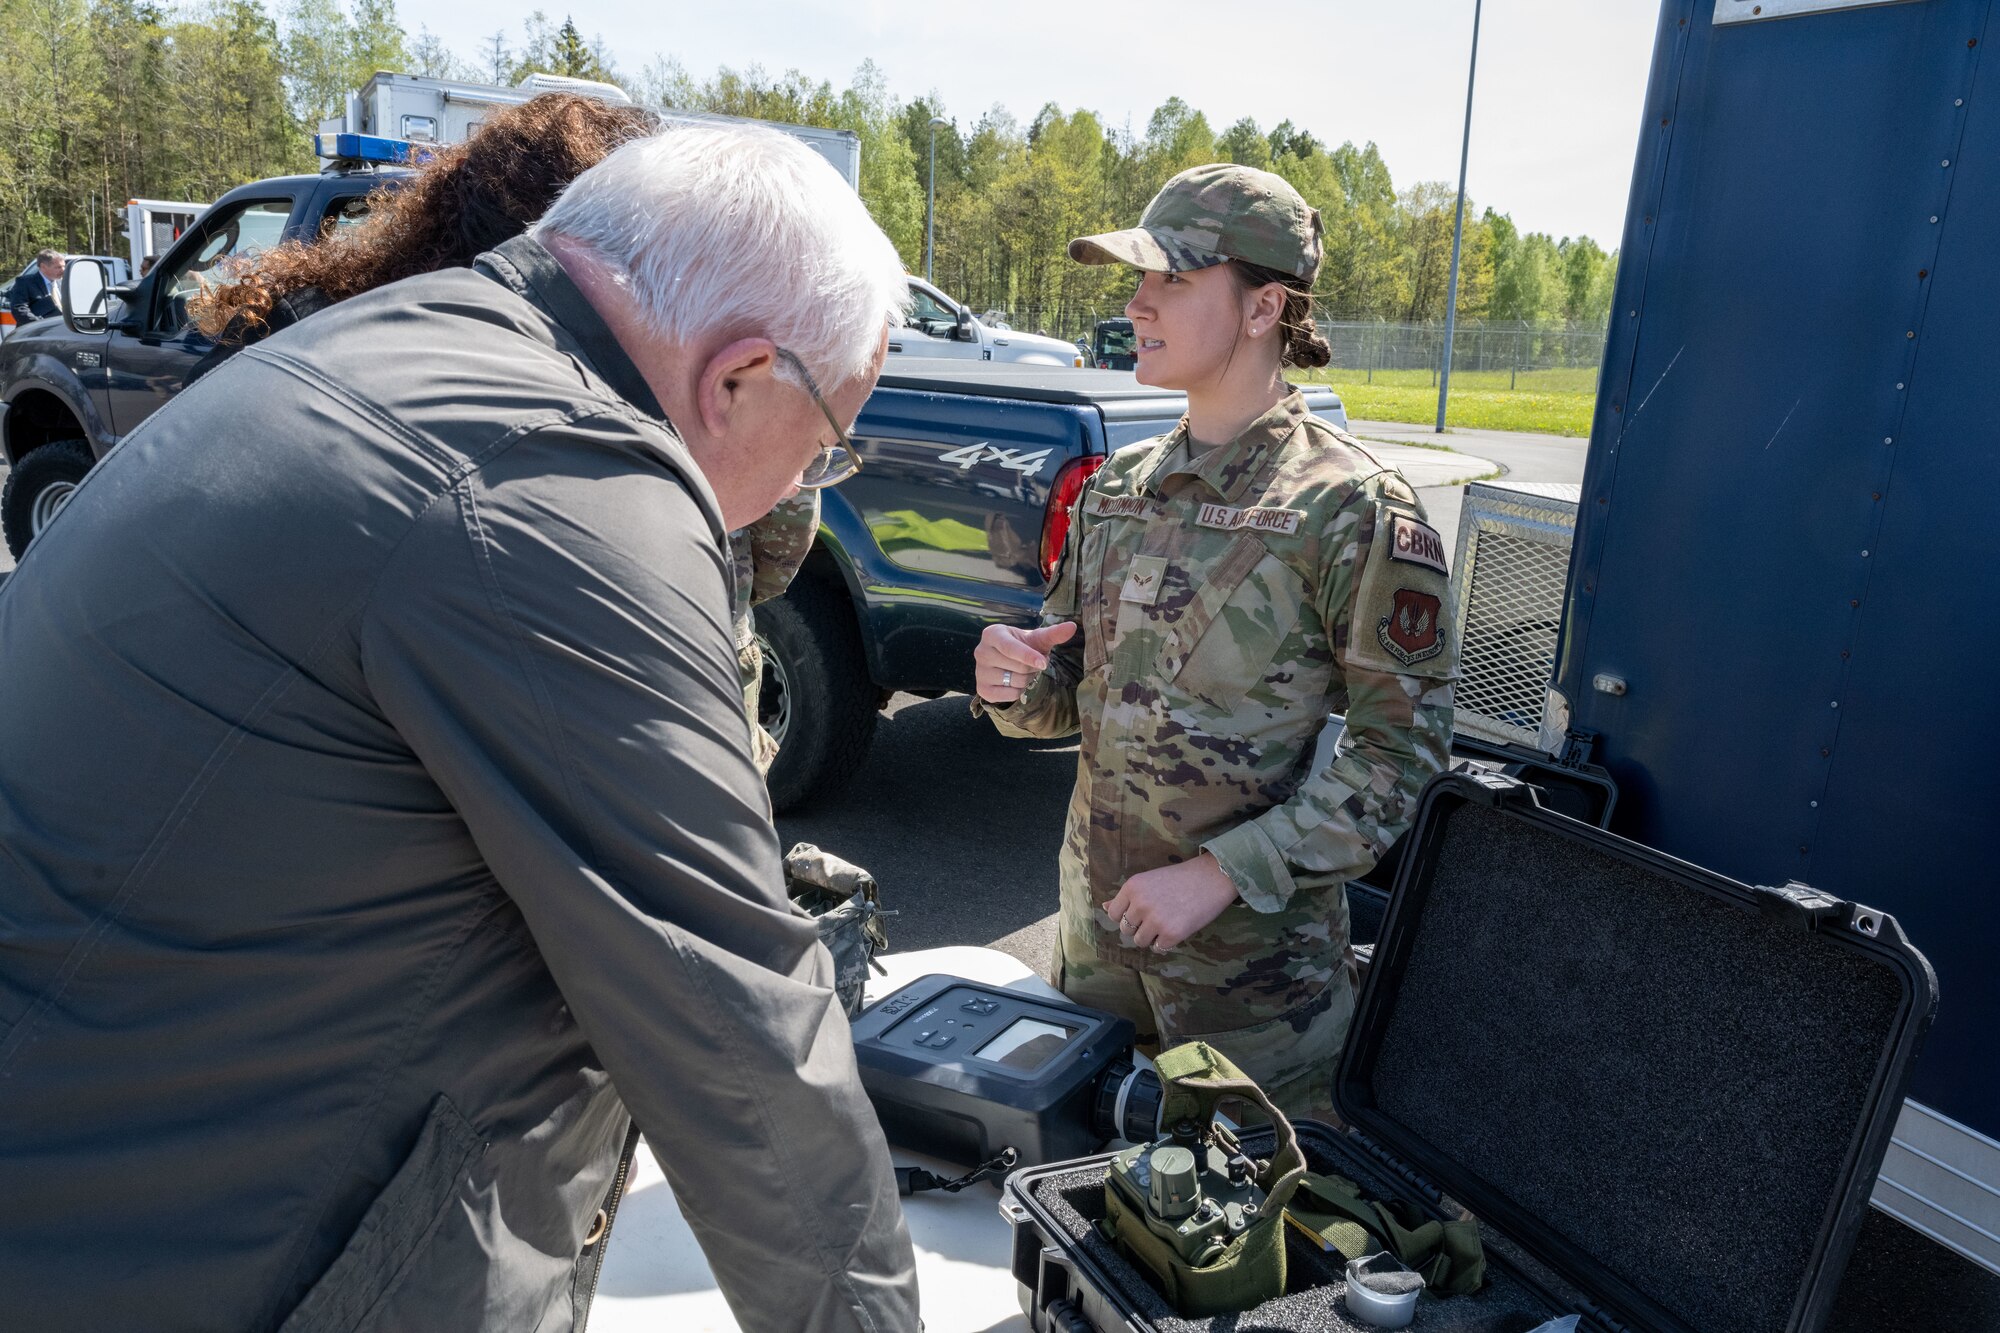 U.S. Air Force Airman 1st Class Rachel McCommon, 52nd Civil Engineer Squadron emergency management journeyman, demonstrates the abilities of a 908 device to German local nationals